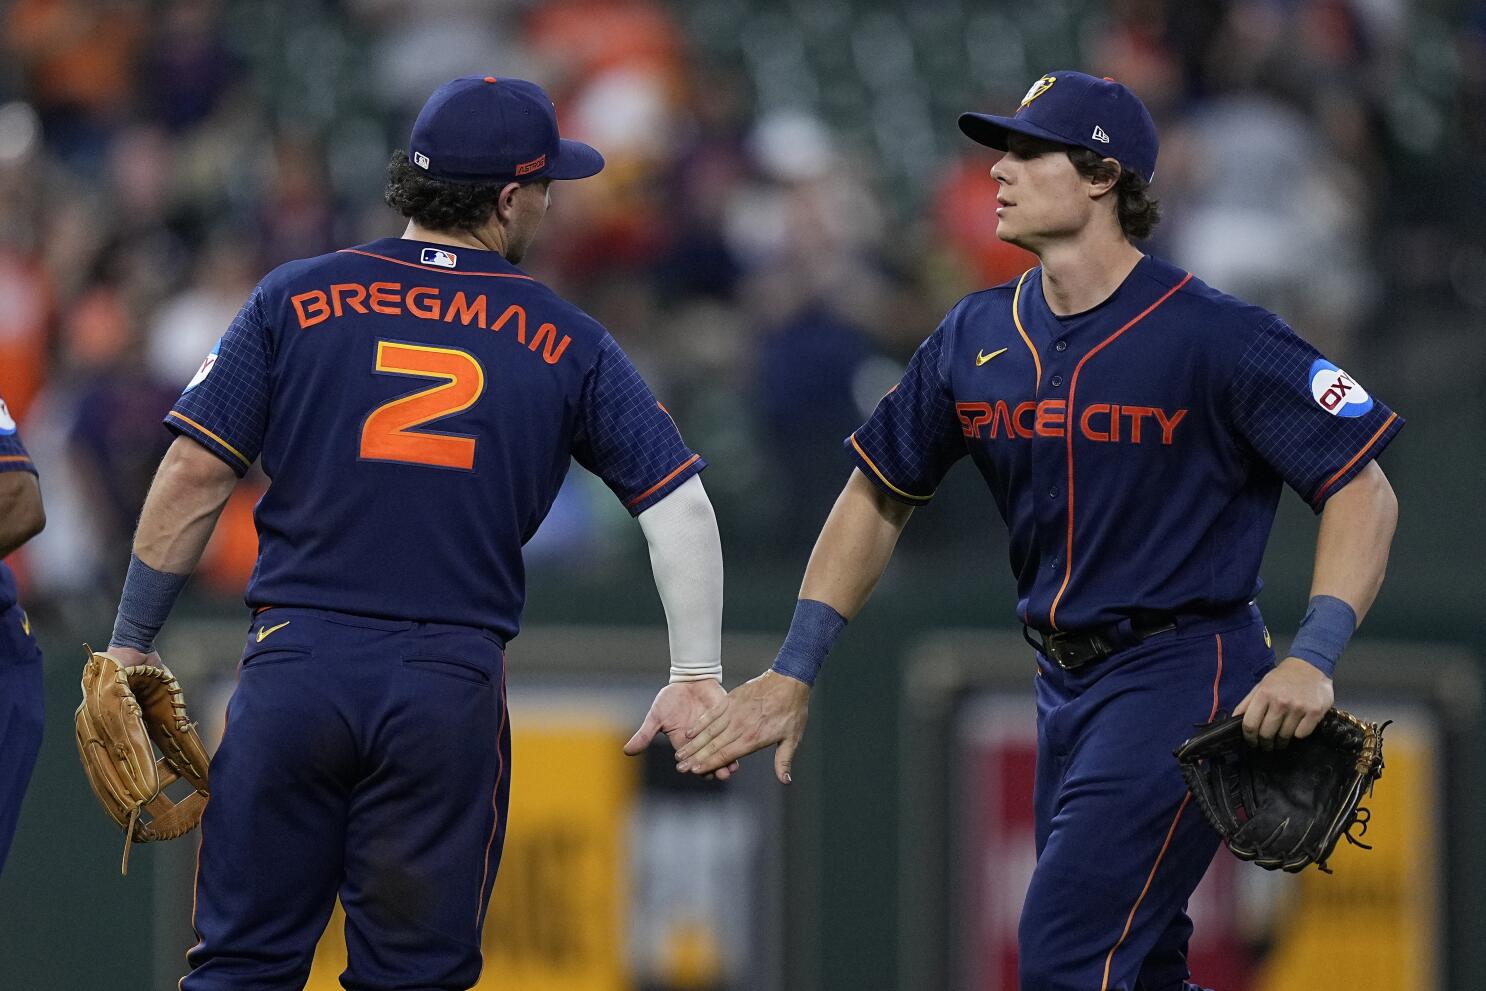 Houston Astros: Jake Meyers says he's OK after being hit in head